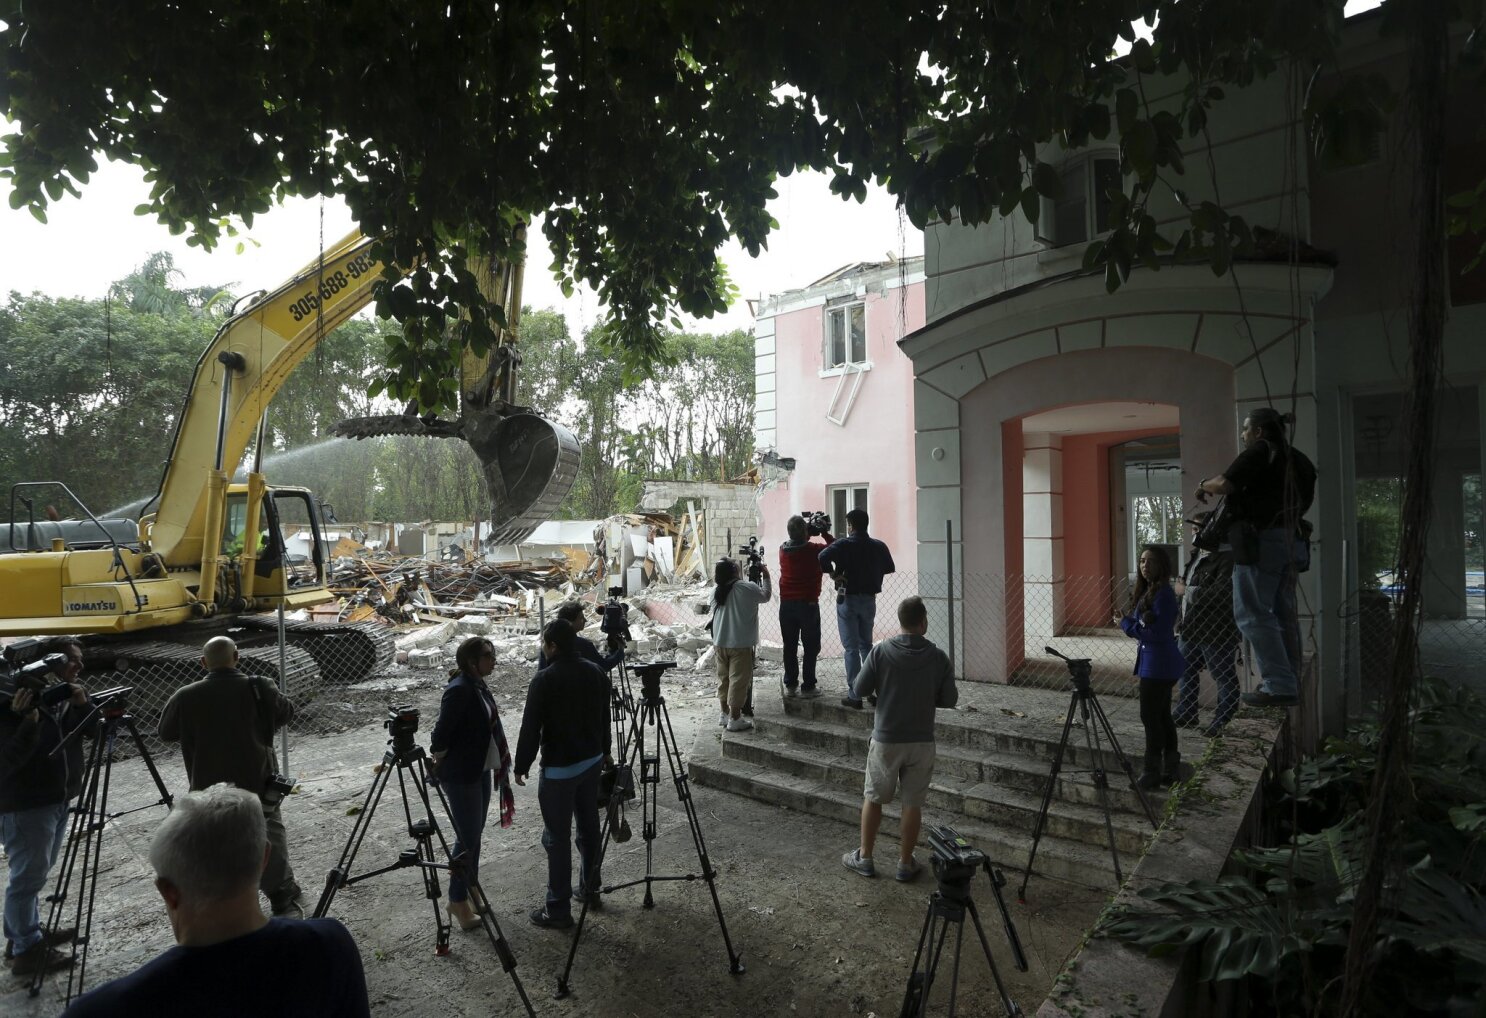 Demolition Begins On Florida Mansion Owned By Pablo Escobar The San Diego Union Tribune